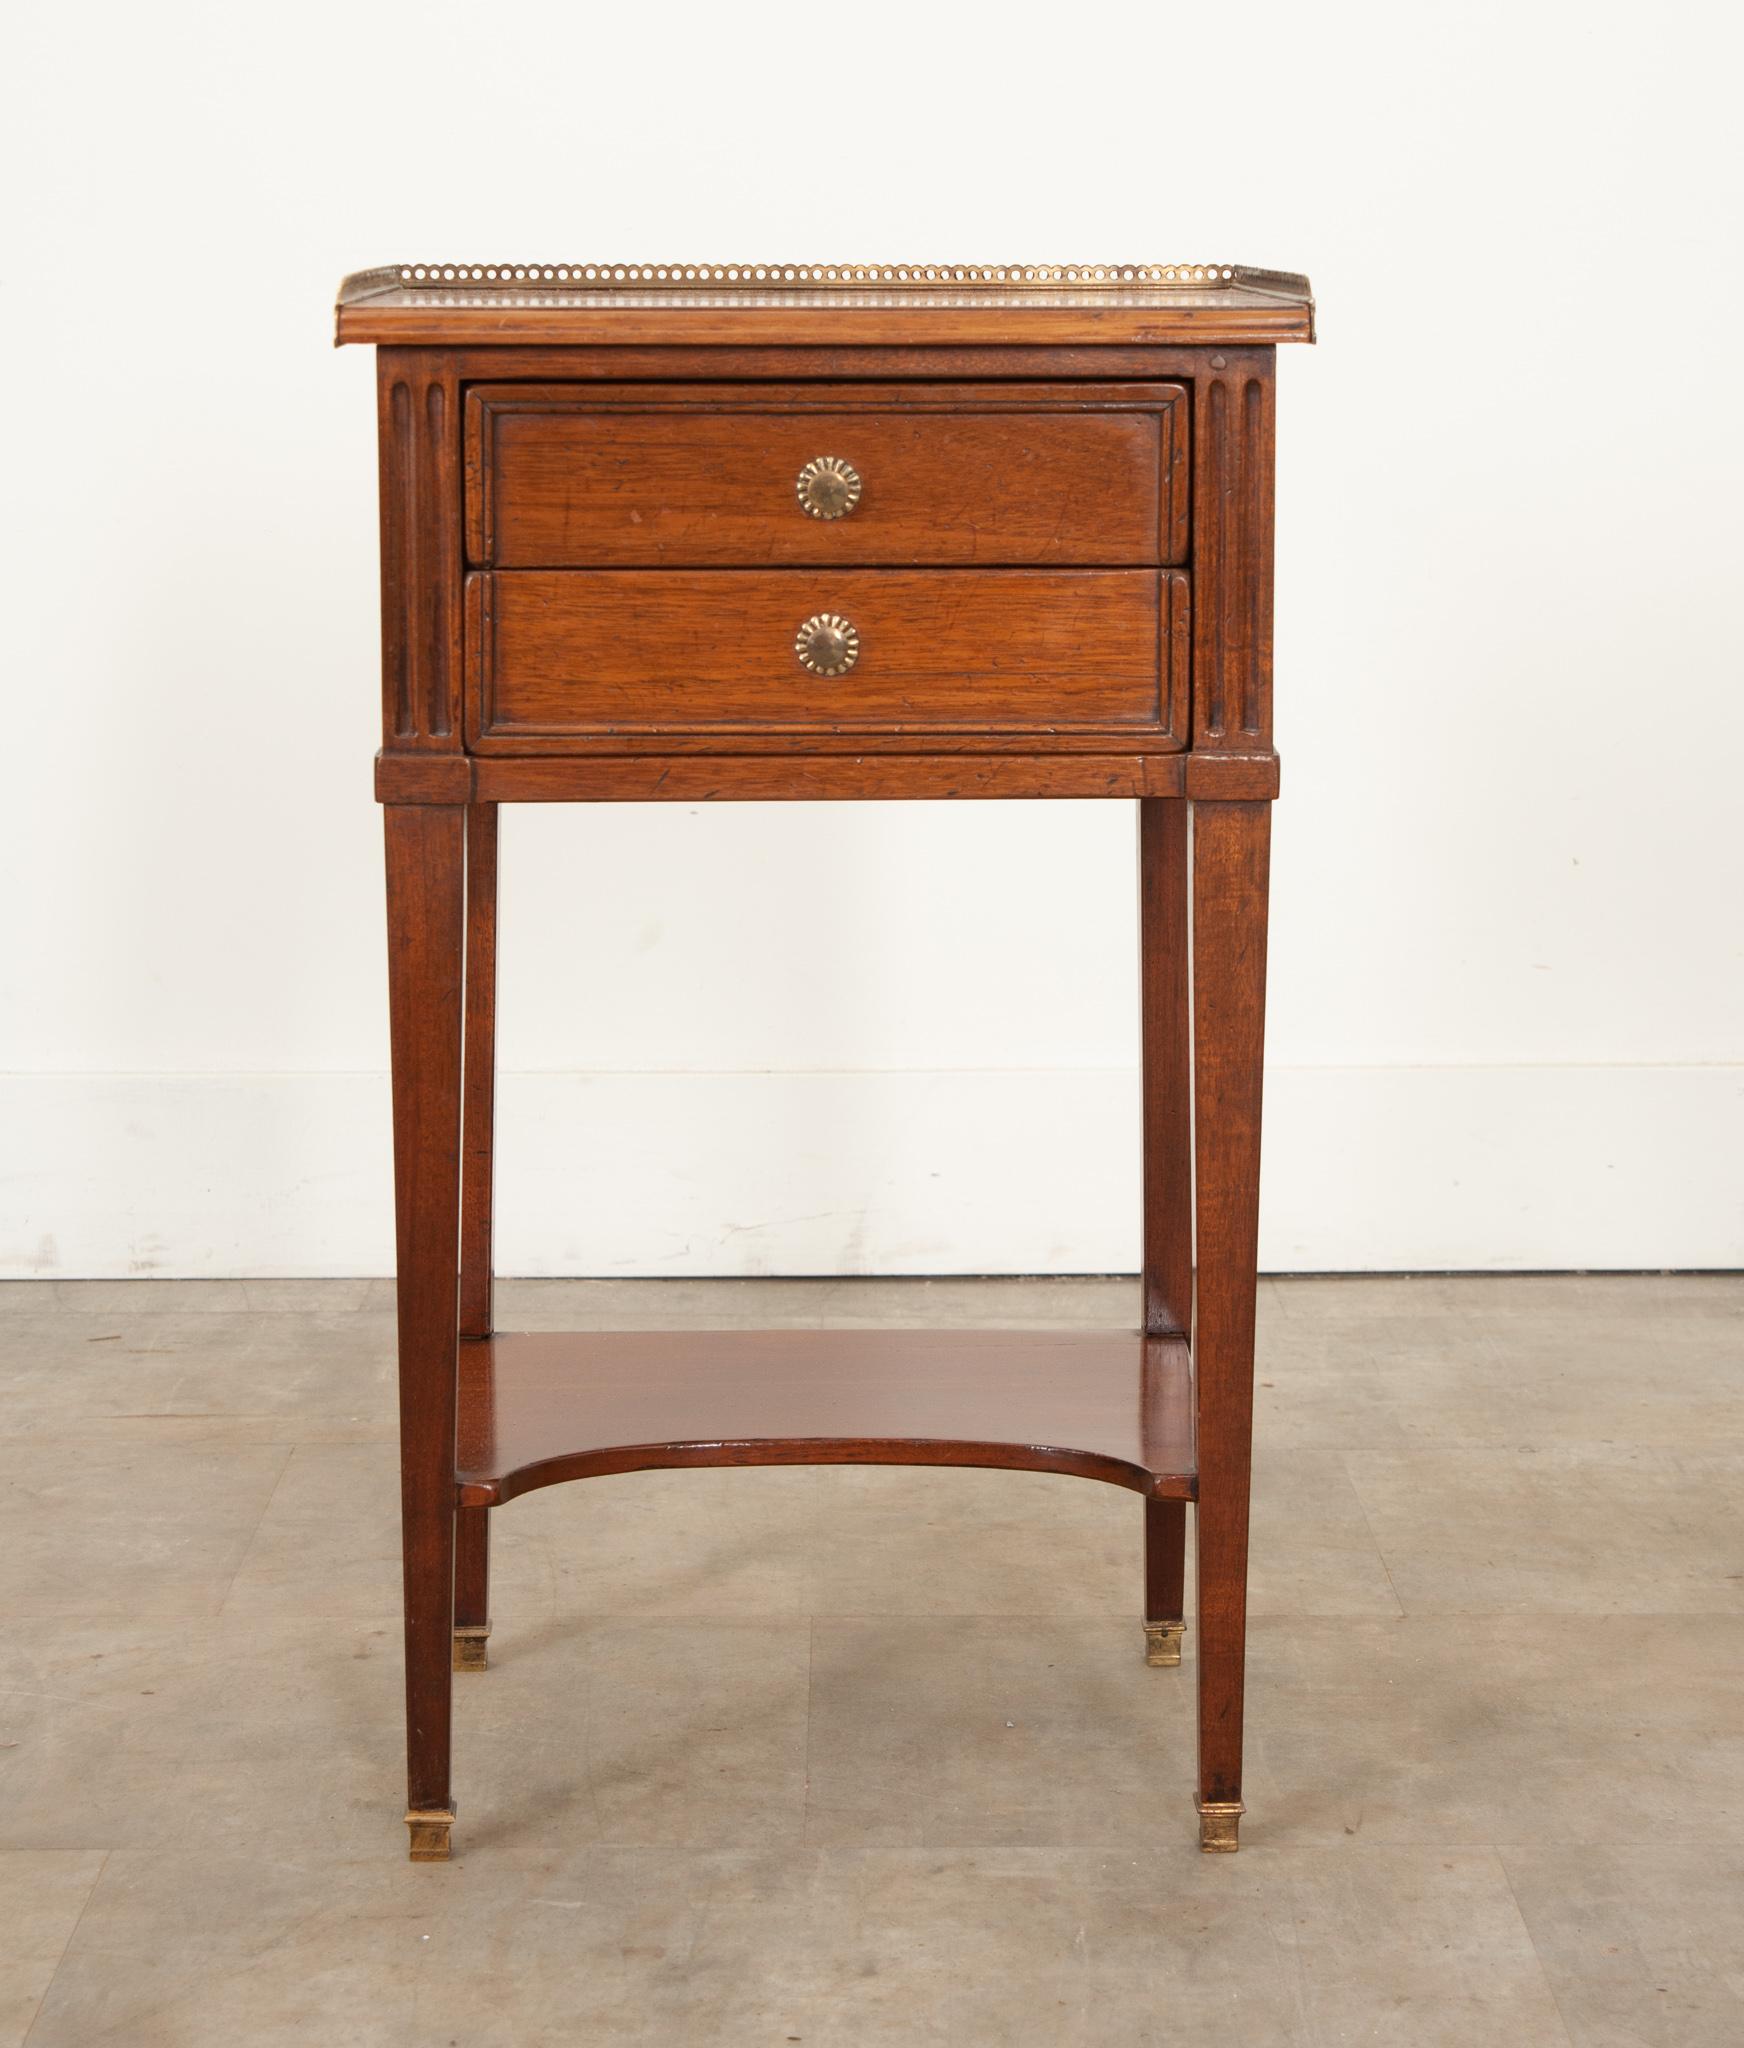 This charming mahogany bedside table was crafted in 19th century France circa 1870. A breakfront pierced brass gallery surrounds the well patinated smooth wood top. Two trimmed drawers flanked by fluted corners are fixed with small starburst brass